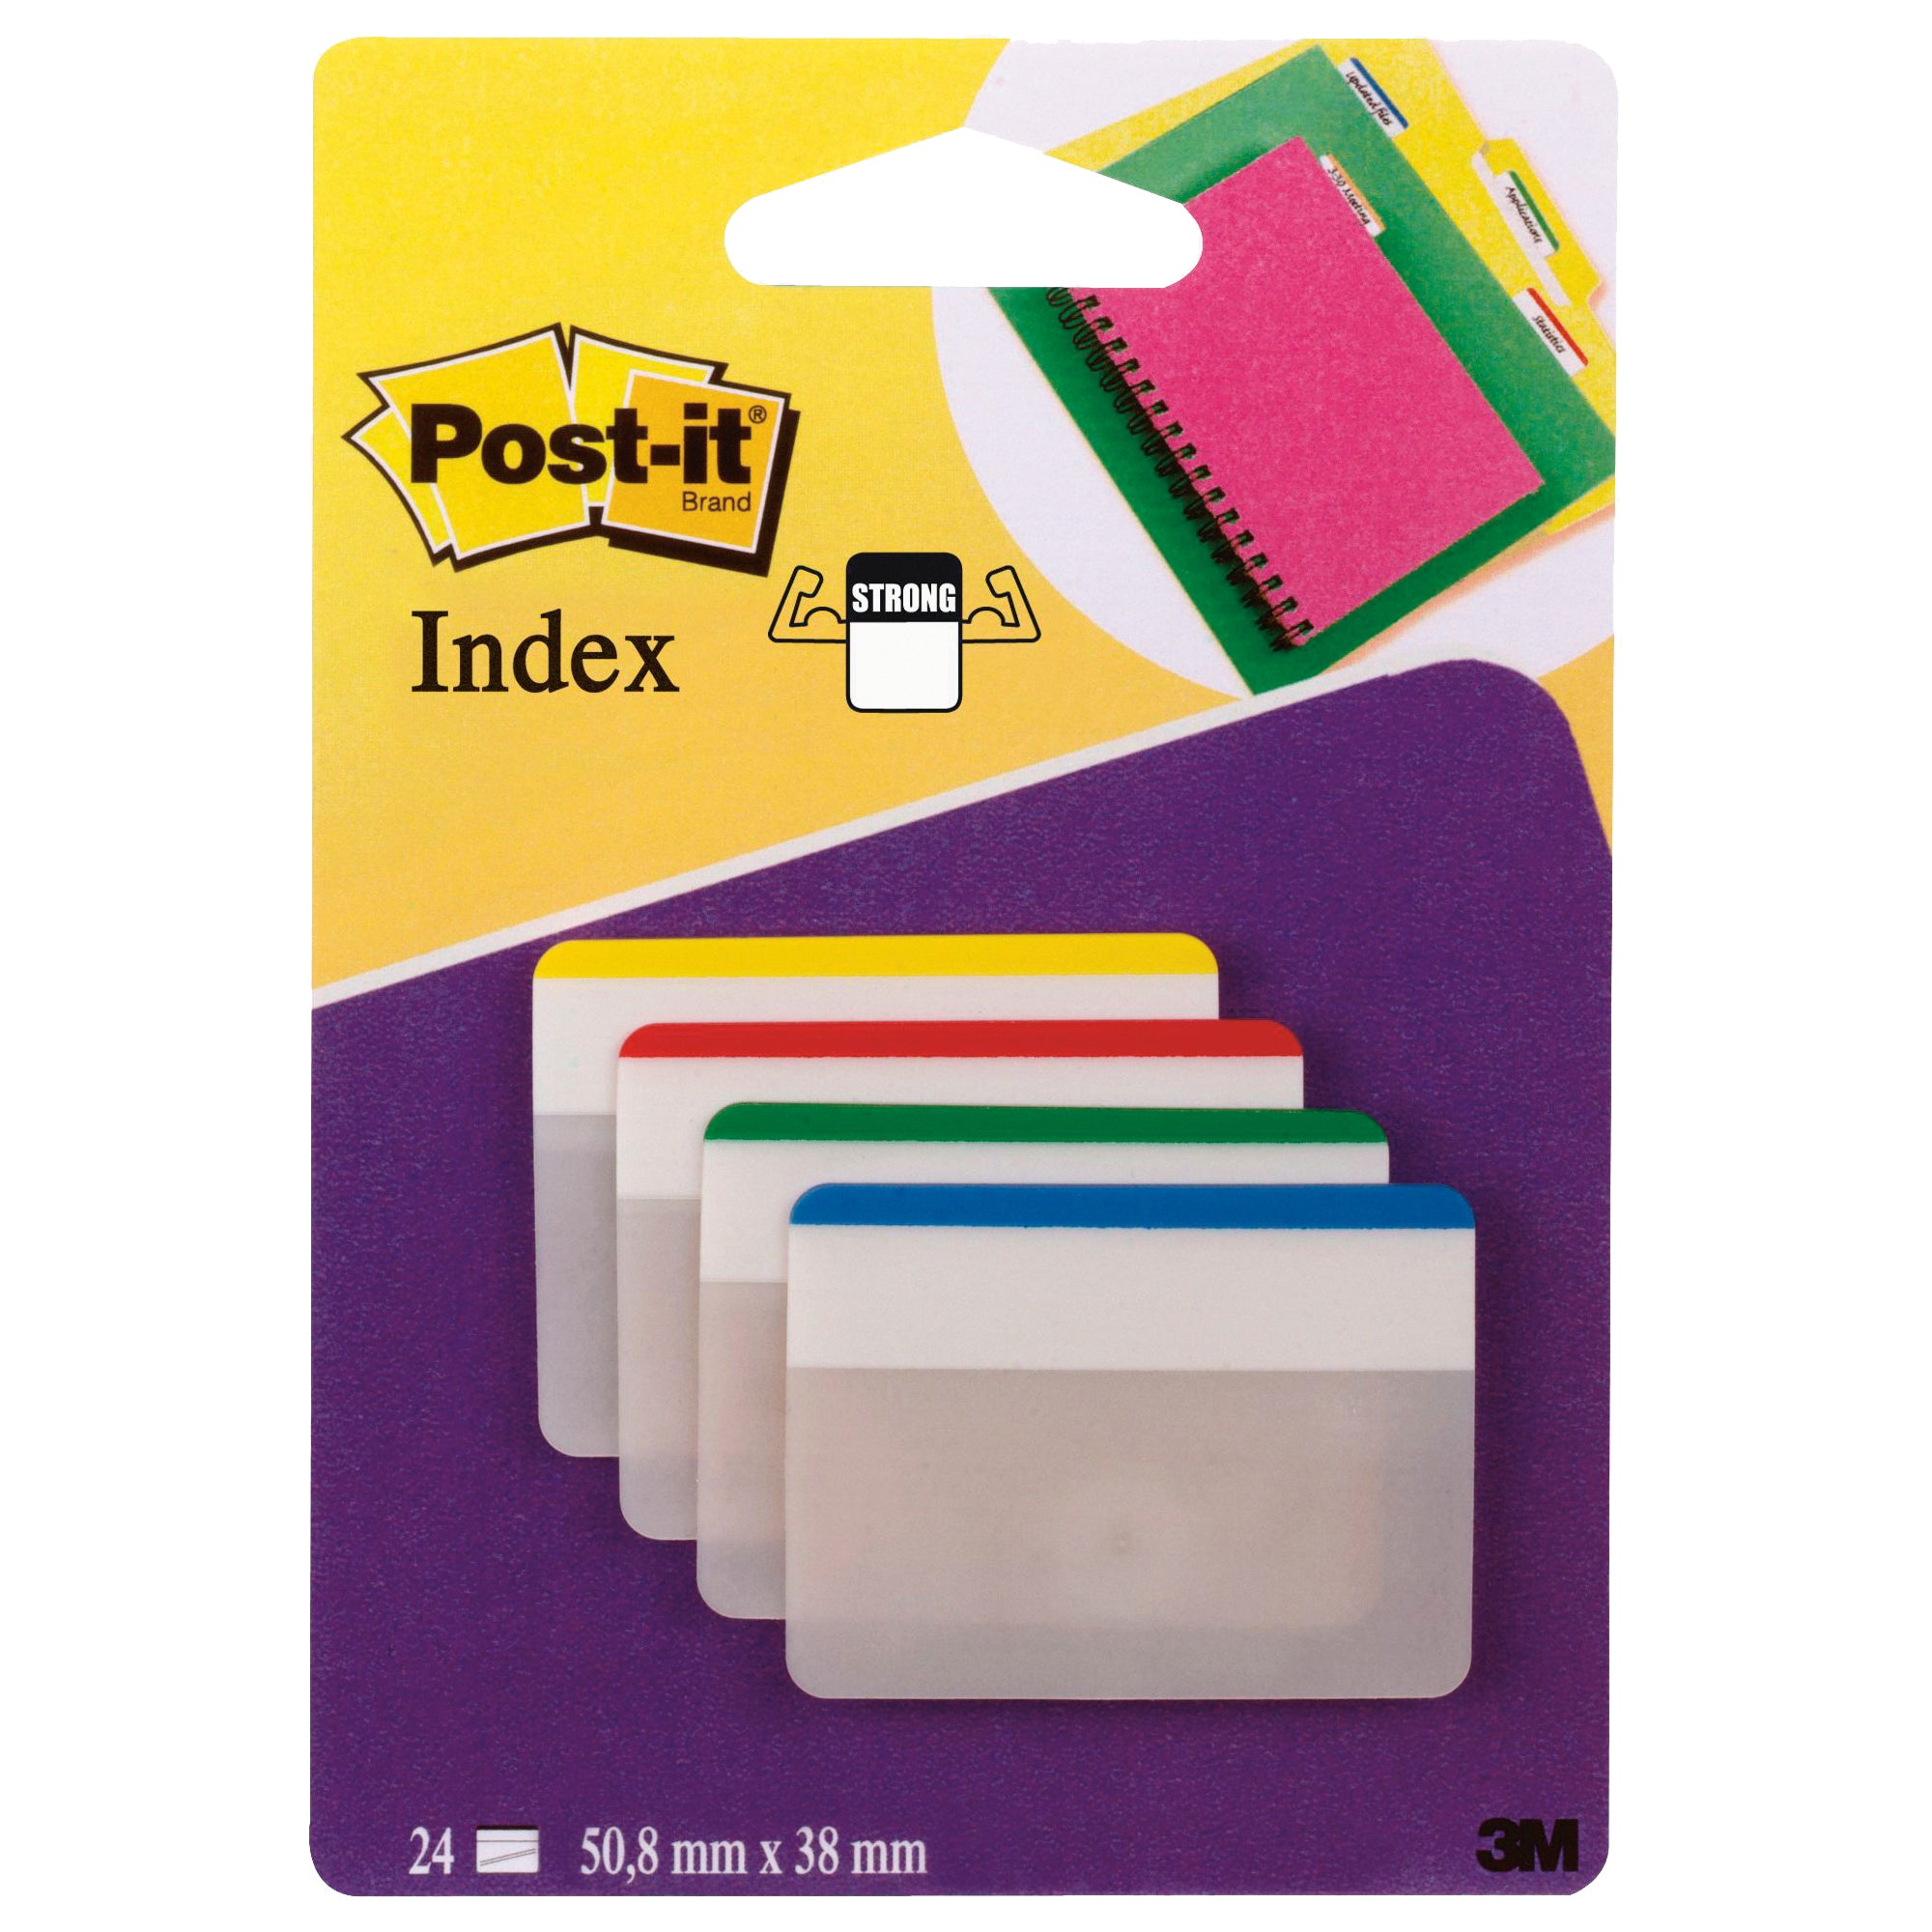 post-it-blister-24-index-strong-686f-1-50-8x38mm-x-archivio